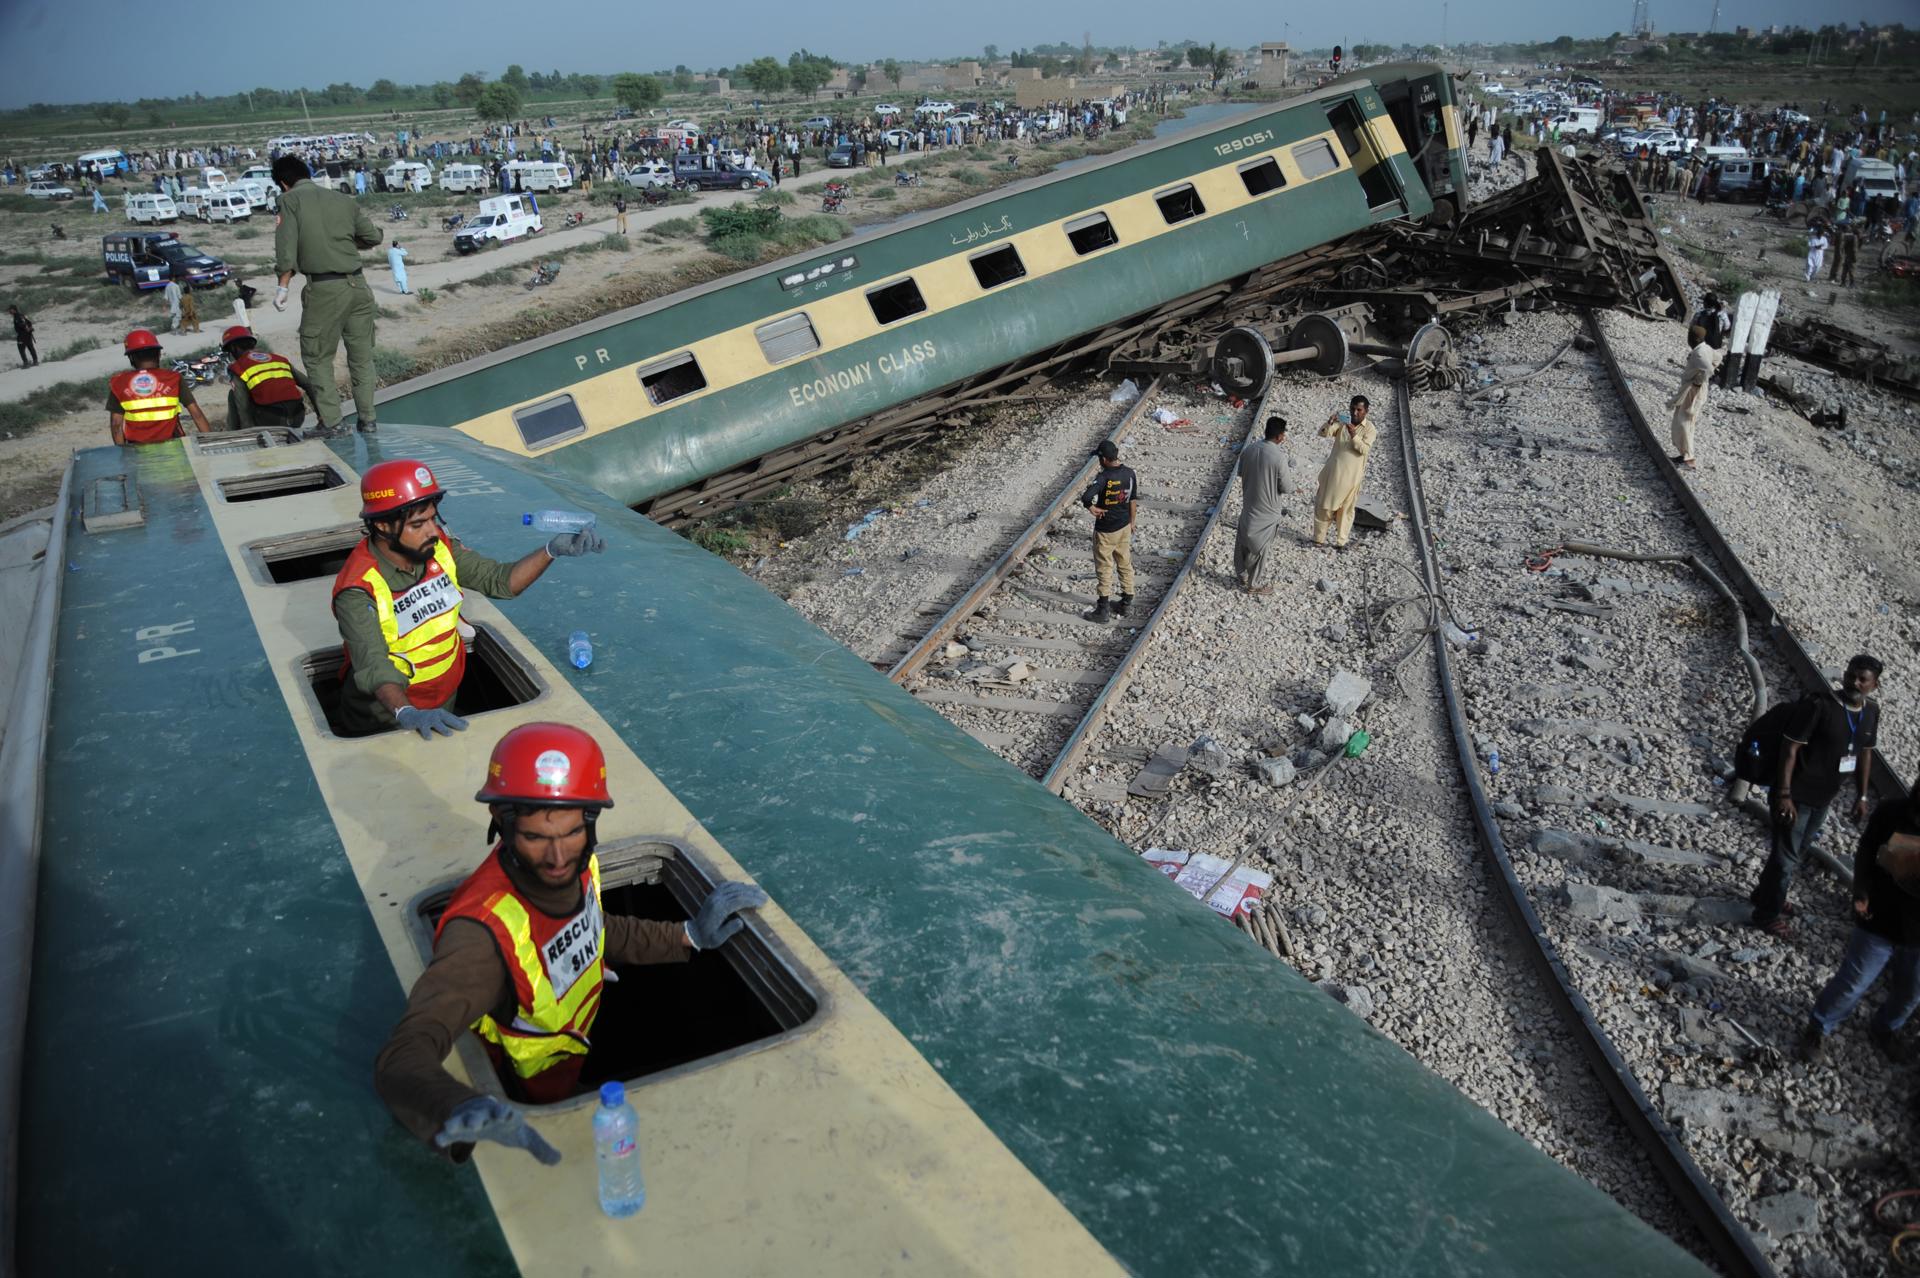 Pakistani security and rescue officials inspect the derailed carriages of a passenger train in Sanghar, near Nawabshah, Pakistan, 06 August 2023. EFE/EPA/NADEEM KHAWER
